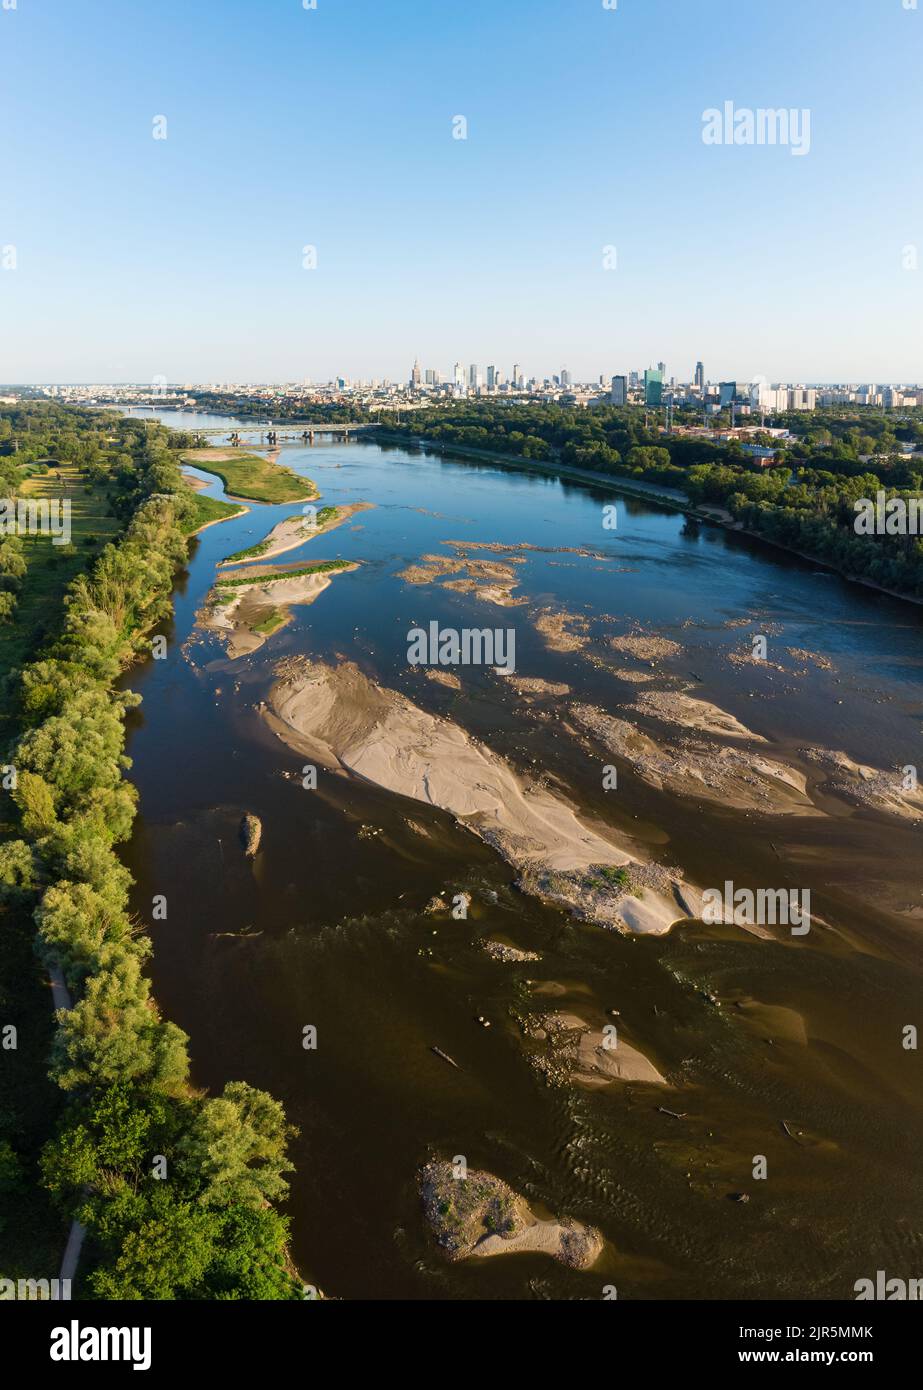 Low water level in Vistula river, effect of drought seen from the bird's eye perspective. City Warsaw in a distance. Stock Photo